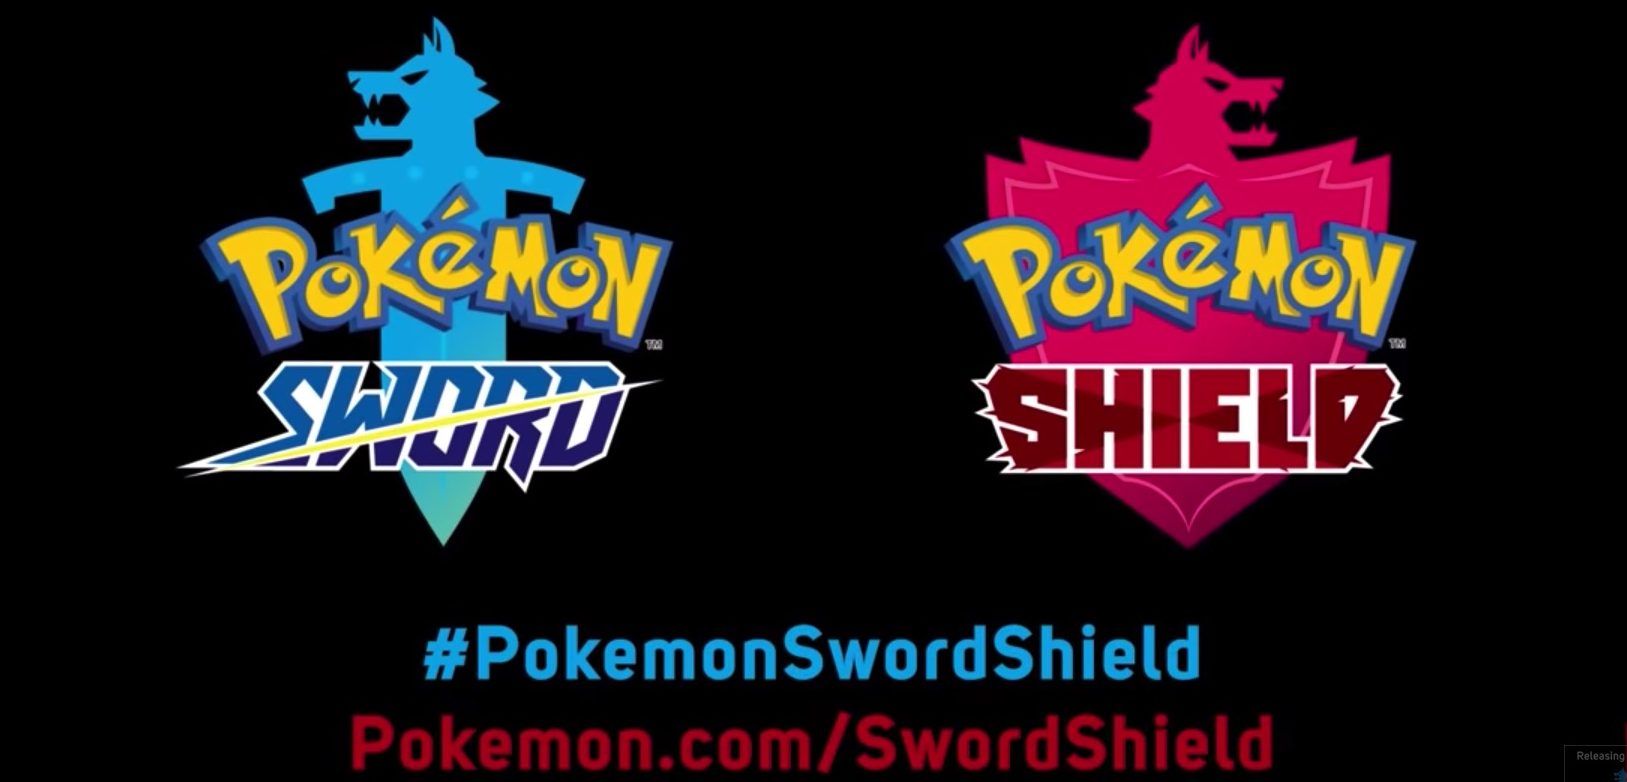 Game Freak Hinted At Pokémon Sword & Shields Name Back In October